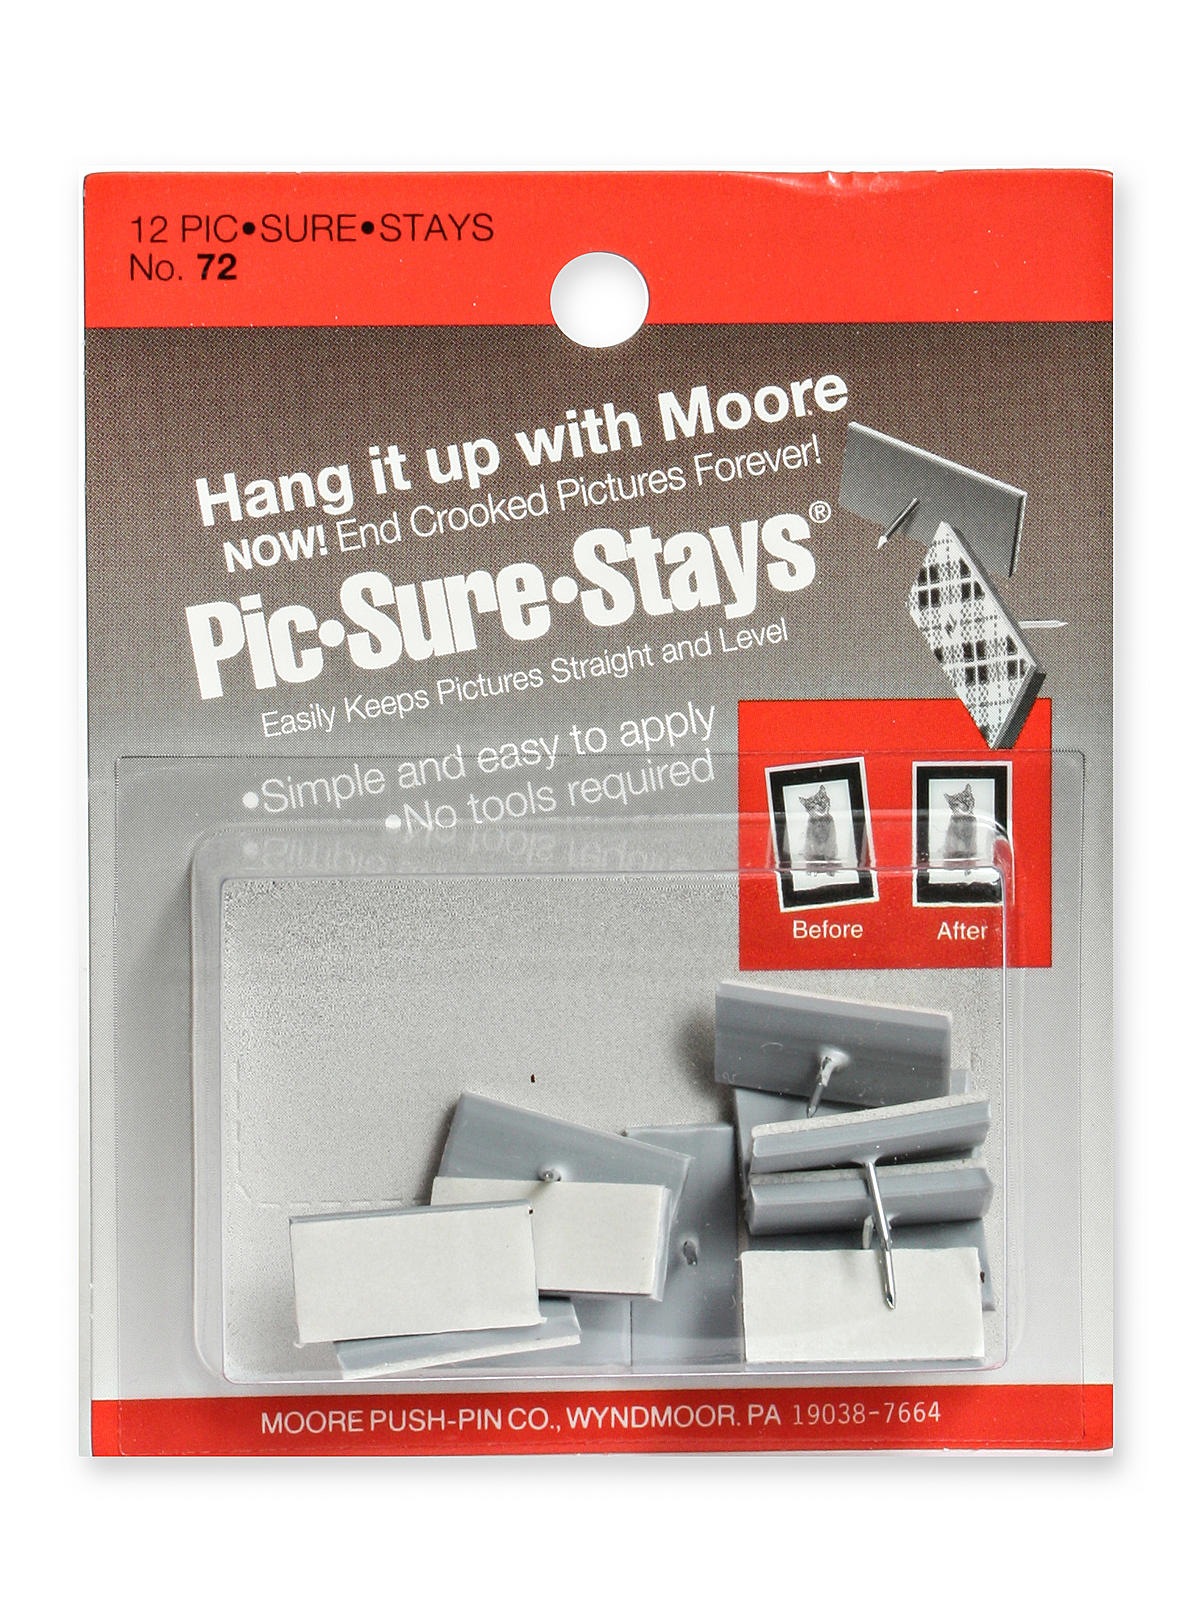 Household Hardware Pic-sure-stay 12 Pack Pack Of 12 No. 72